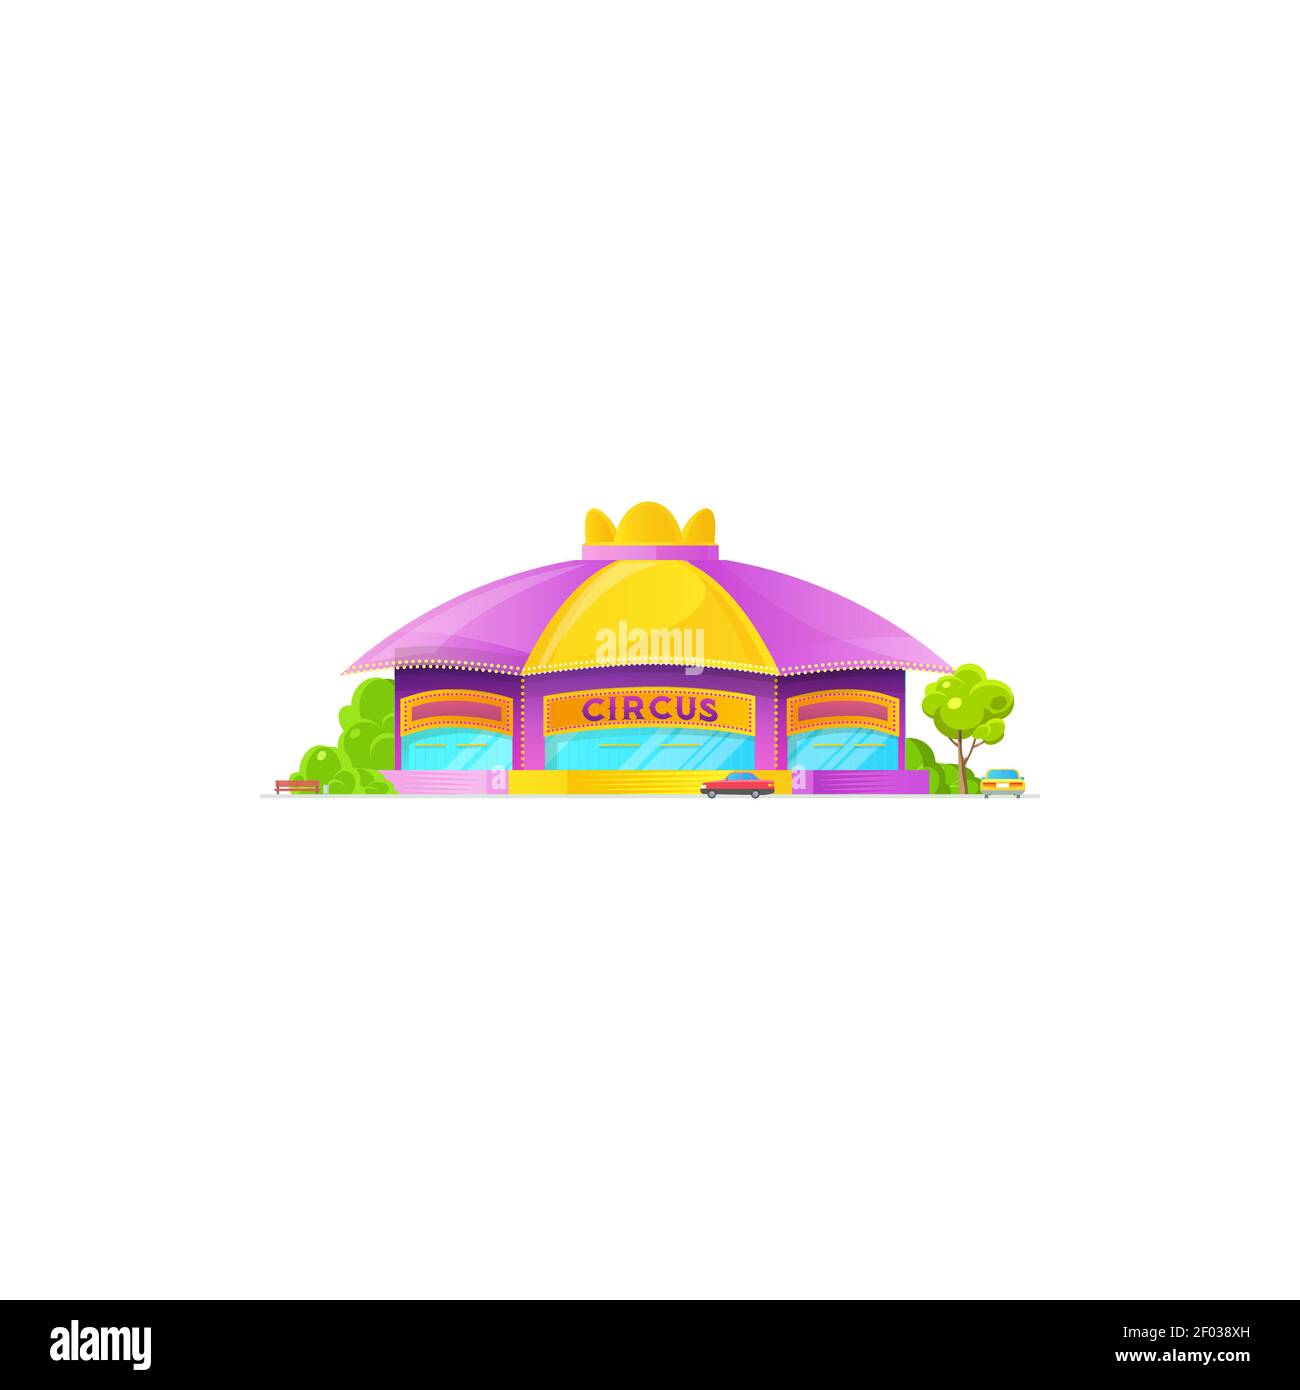 Circus building and trees, facade exterior design, crown on roof. Vector big top circus isolated building, parking zone with cars, green trees. Entert Stock Vector